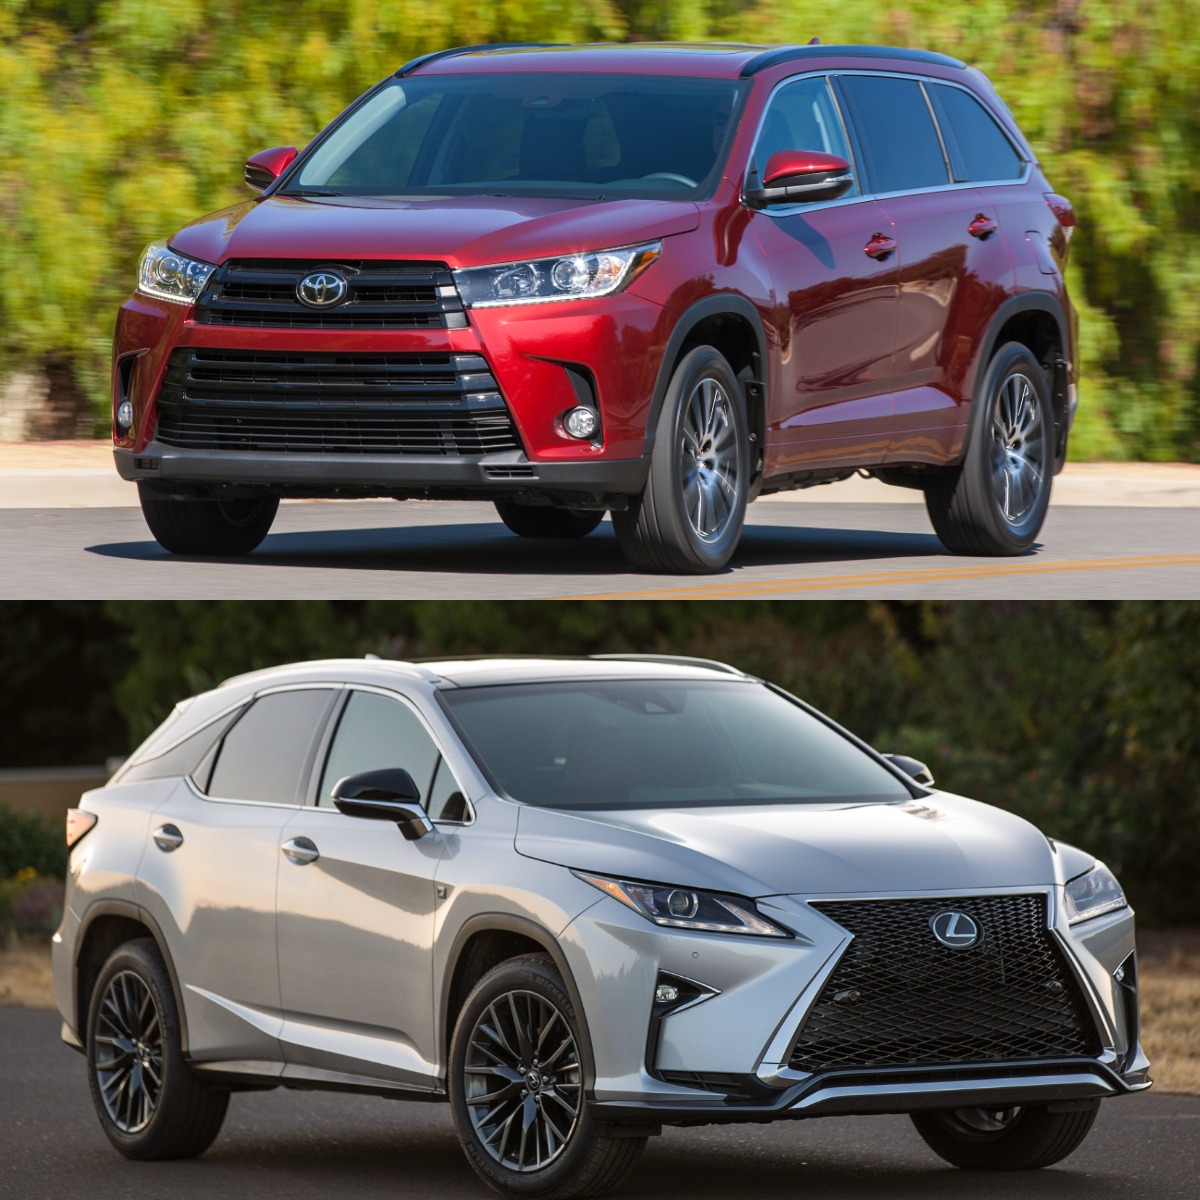 Toyota and Lexus make reliable used SUVs